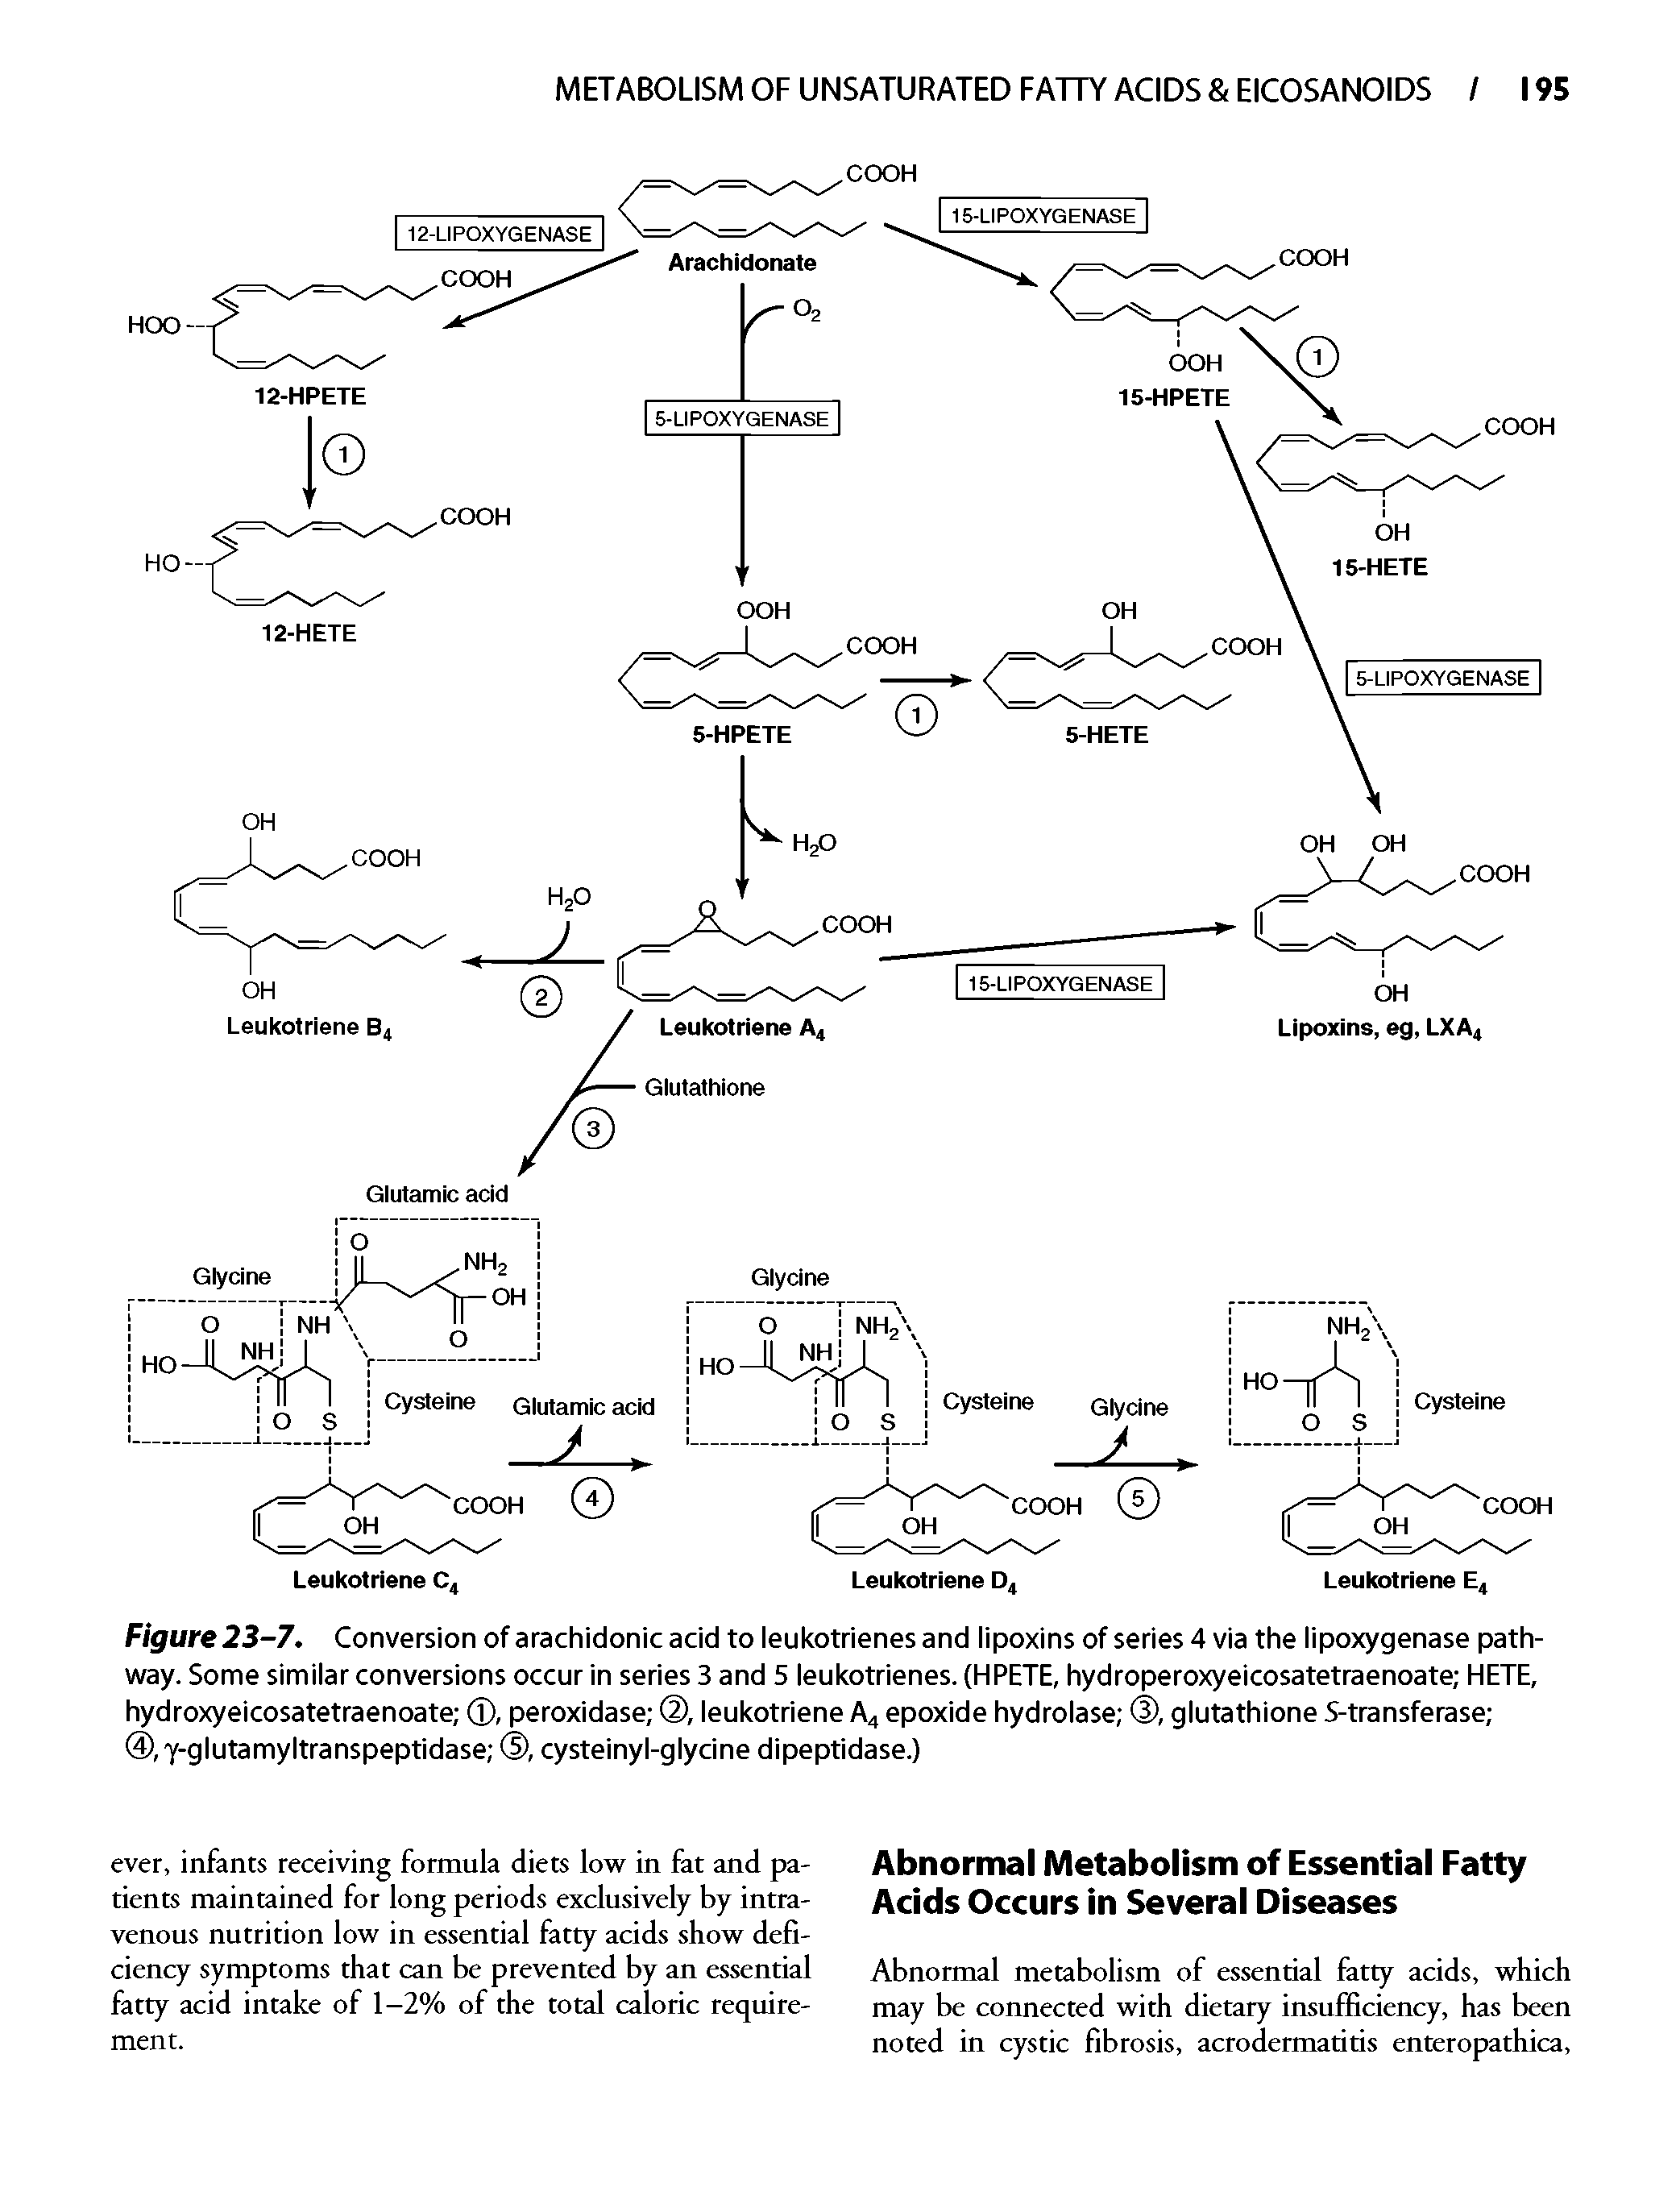 Figure 23-7. Conversion of arachidonicacid to leukotrienesand lipoxins of series 4 via the lipoxygenase pathway. Some similar conversions occur in series 3 and 5 leukotrienes. (HPETE, hydroperoxyeicosatetraenoate HETE, hydroxyeicosatetraenoate , peroxidase (2), leukotriene A4 epoxide hydrolase , glutathione S-transferase ...